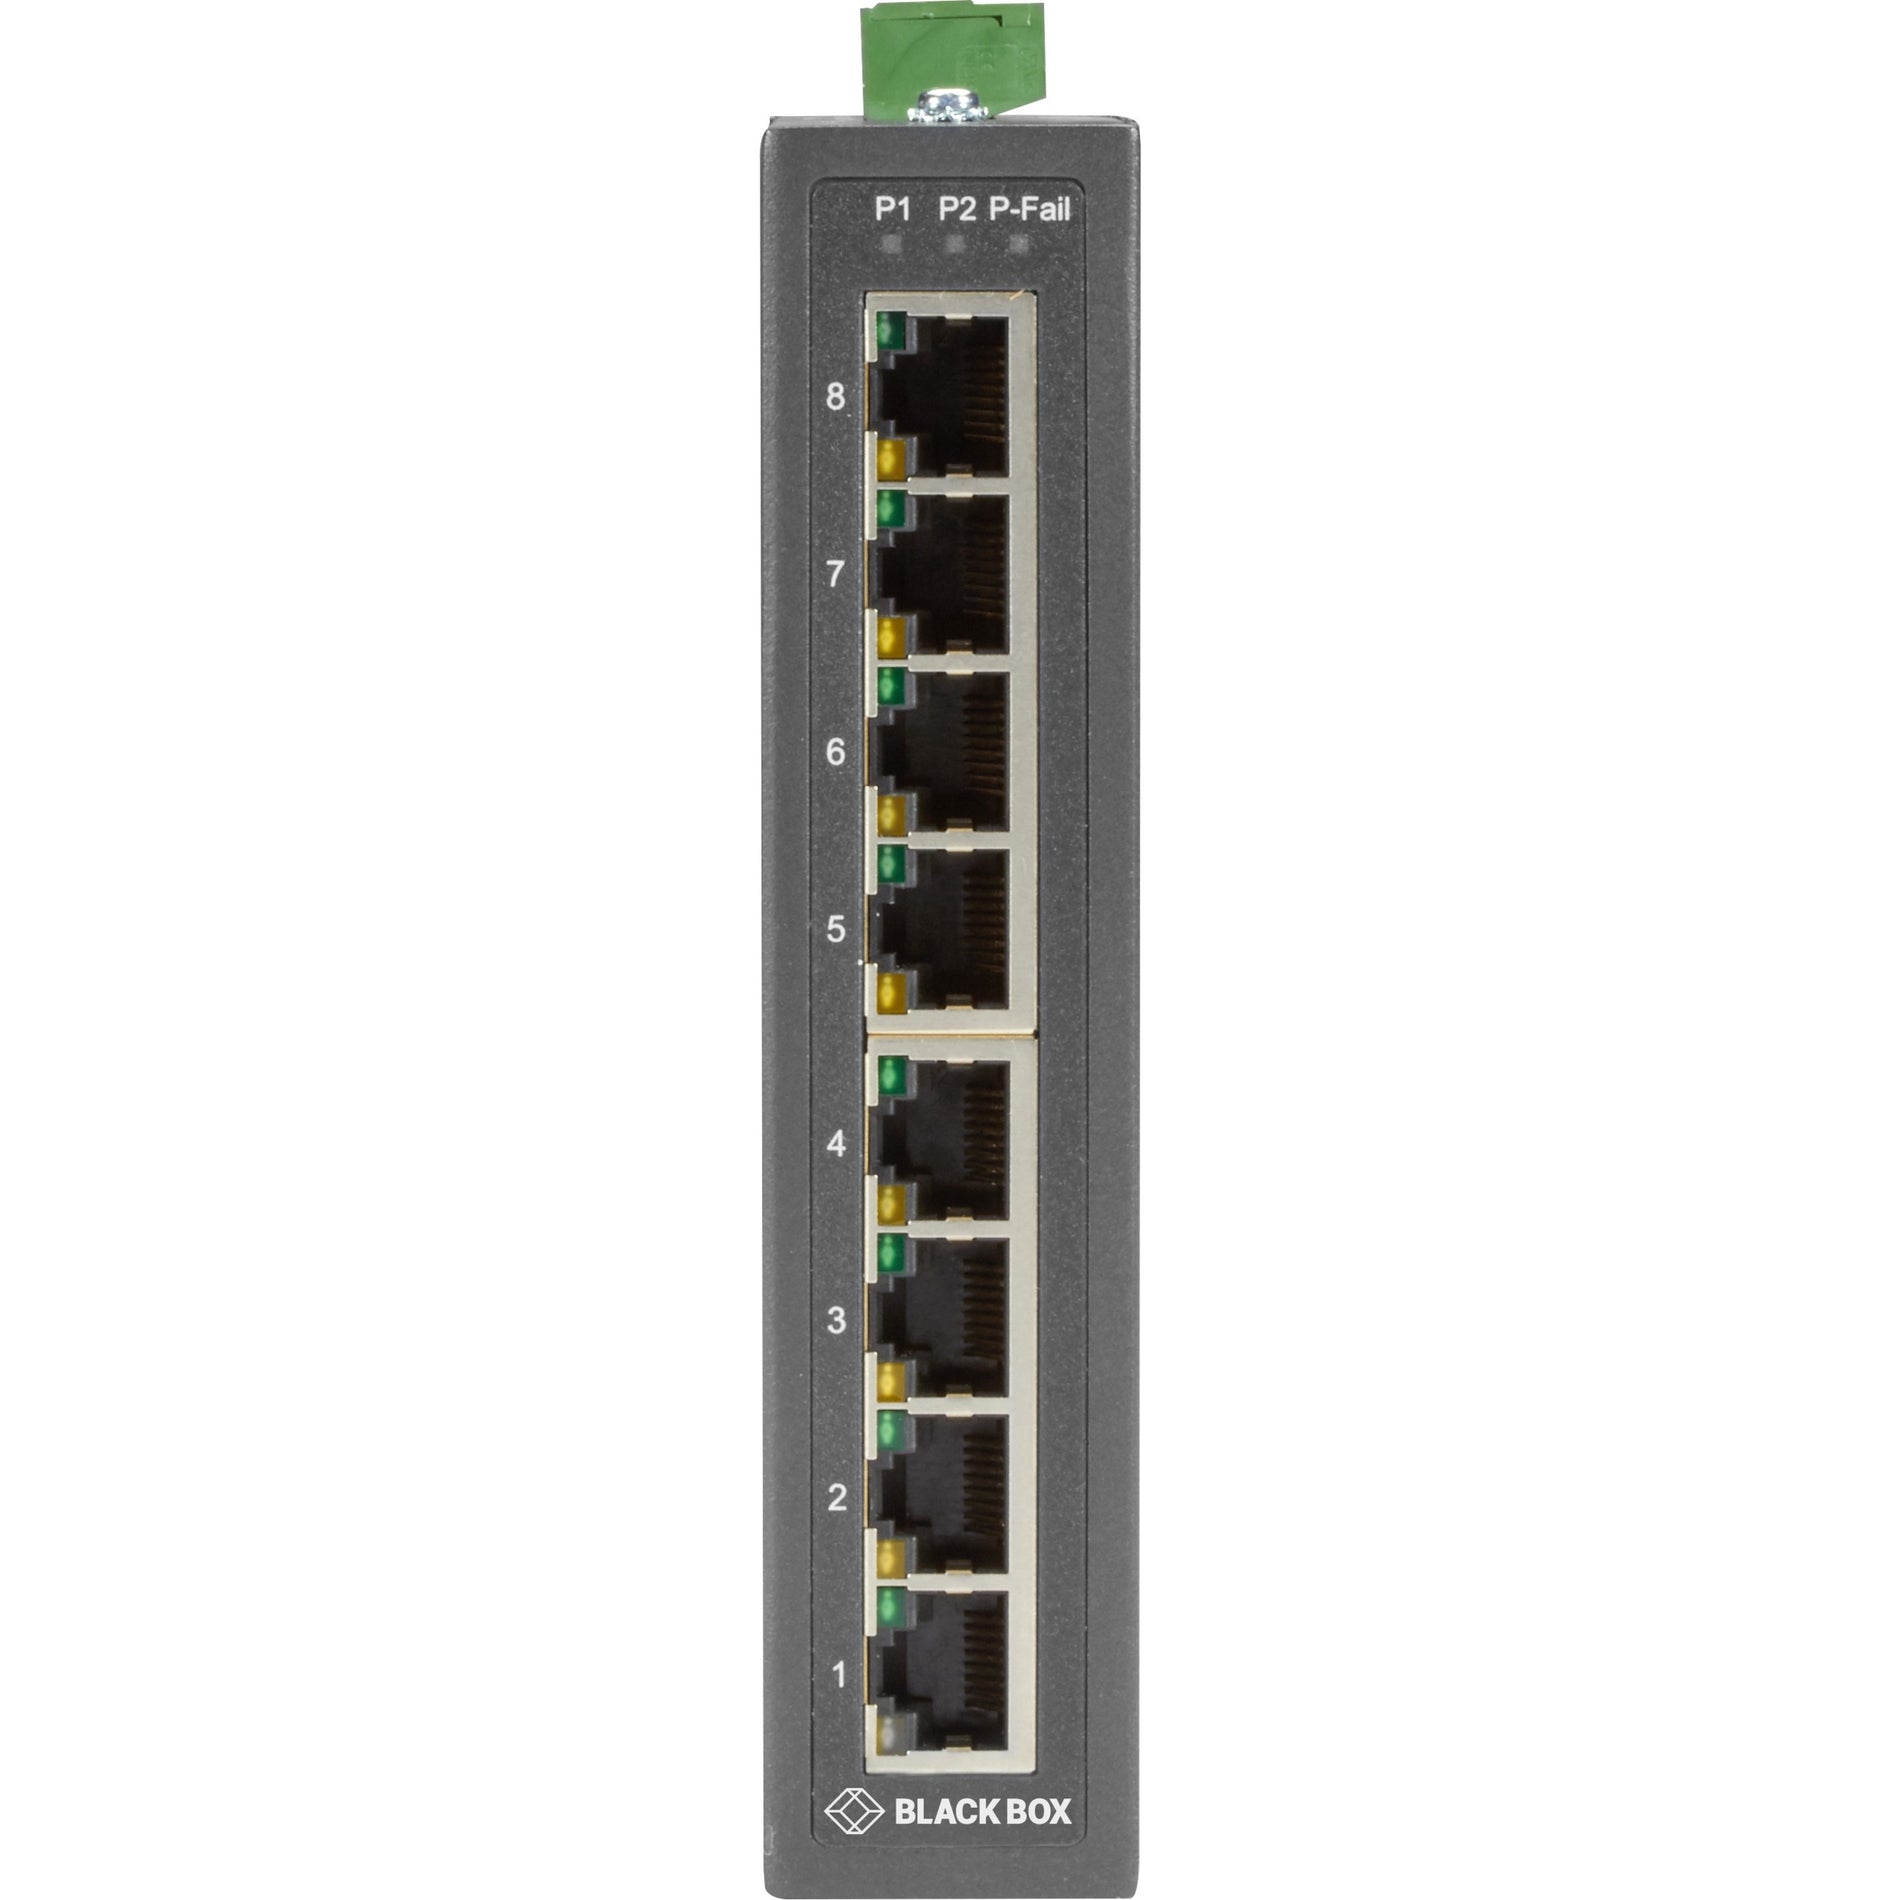 Black Box LBH3080A Industrial 8-Port Ethernet Switch, Unmanaged, Extreme Temperature